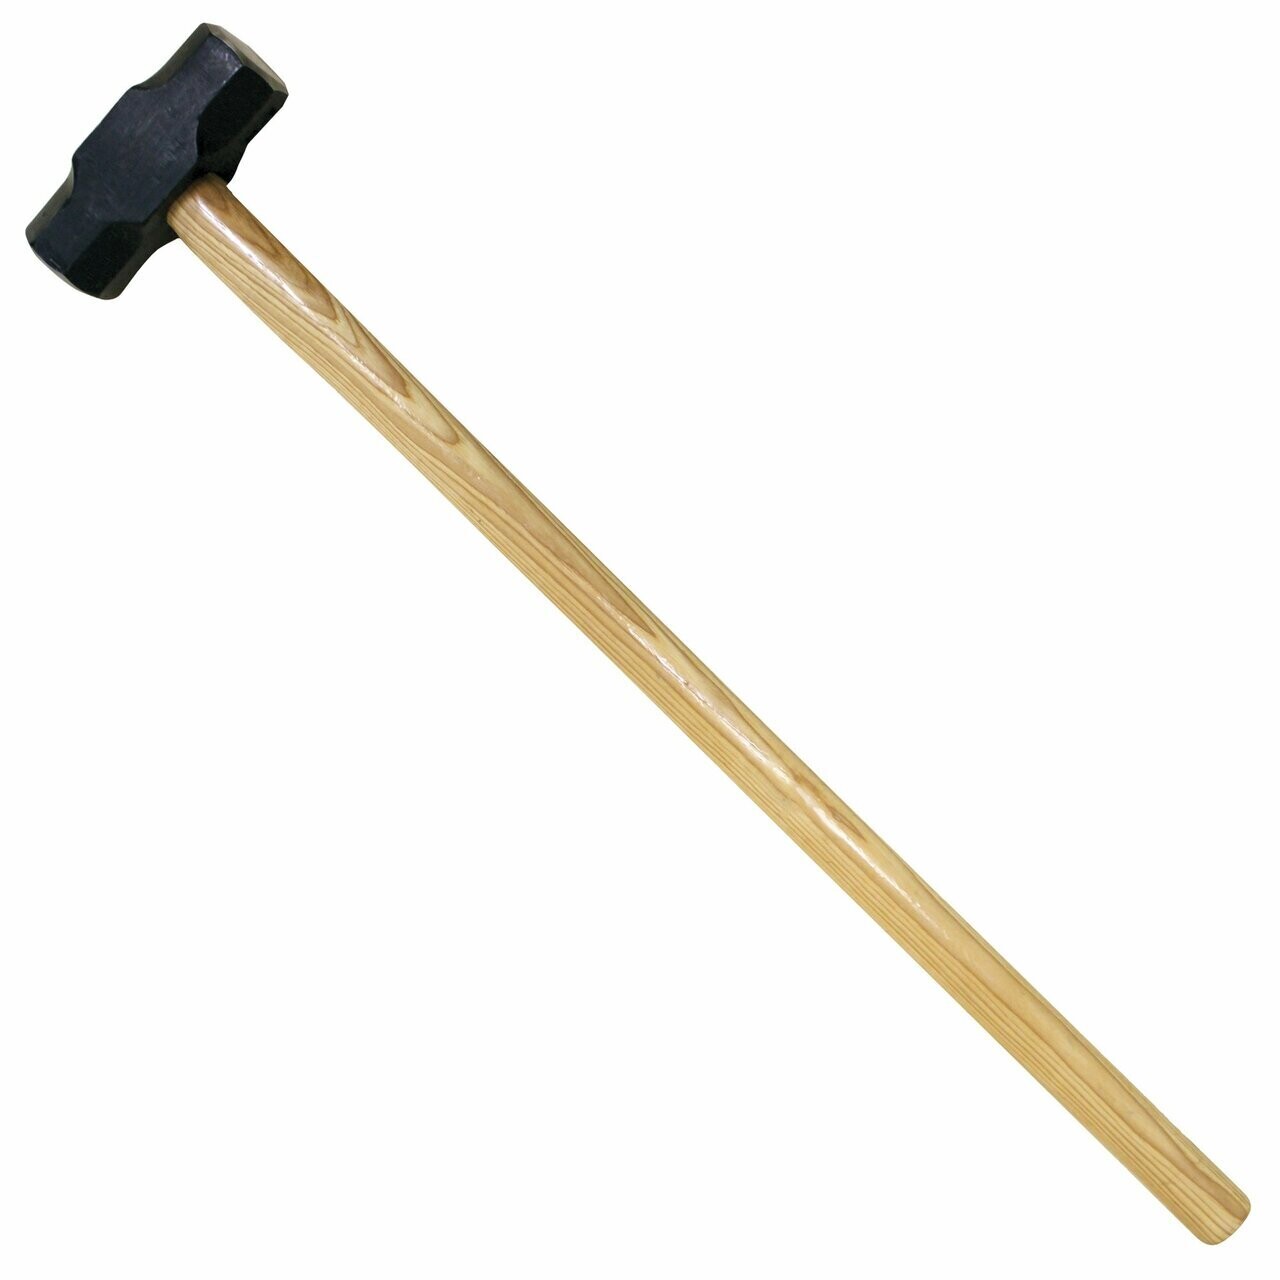 Kraft GG640 10 lb. Double Faced Sledge Hammer with 32" Wood Handle Pack of 4